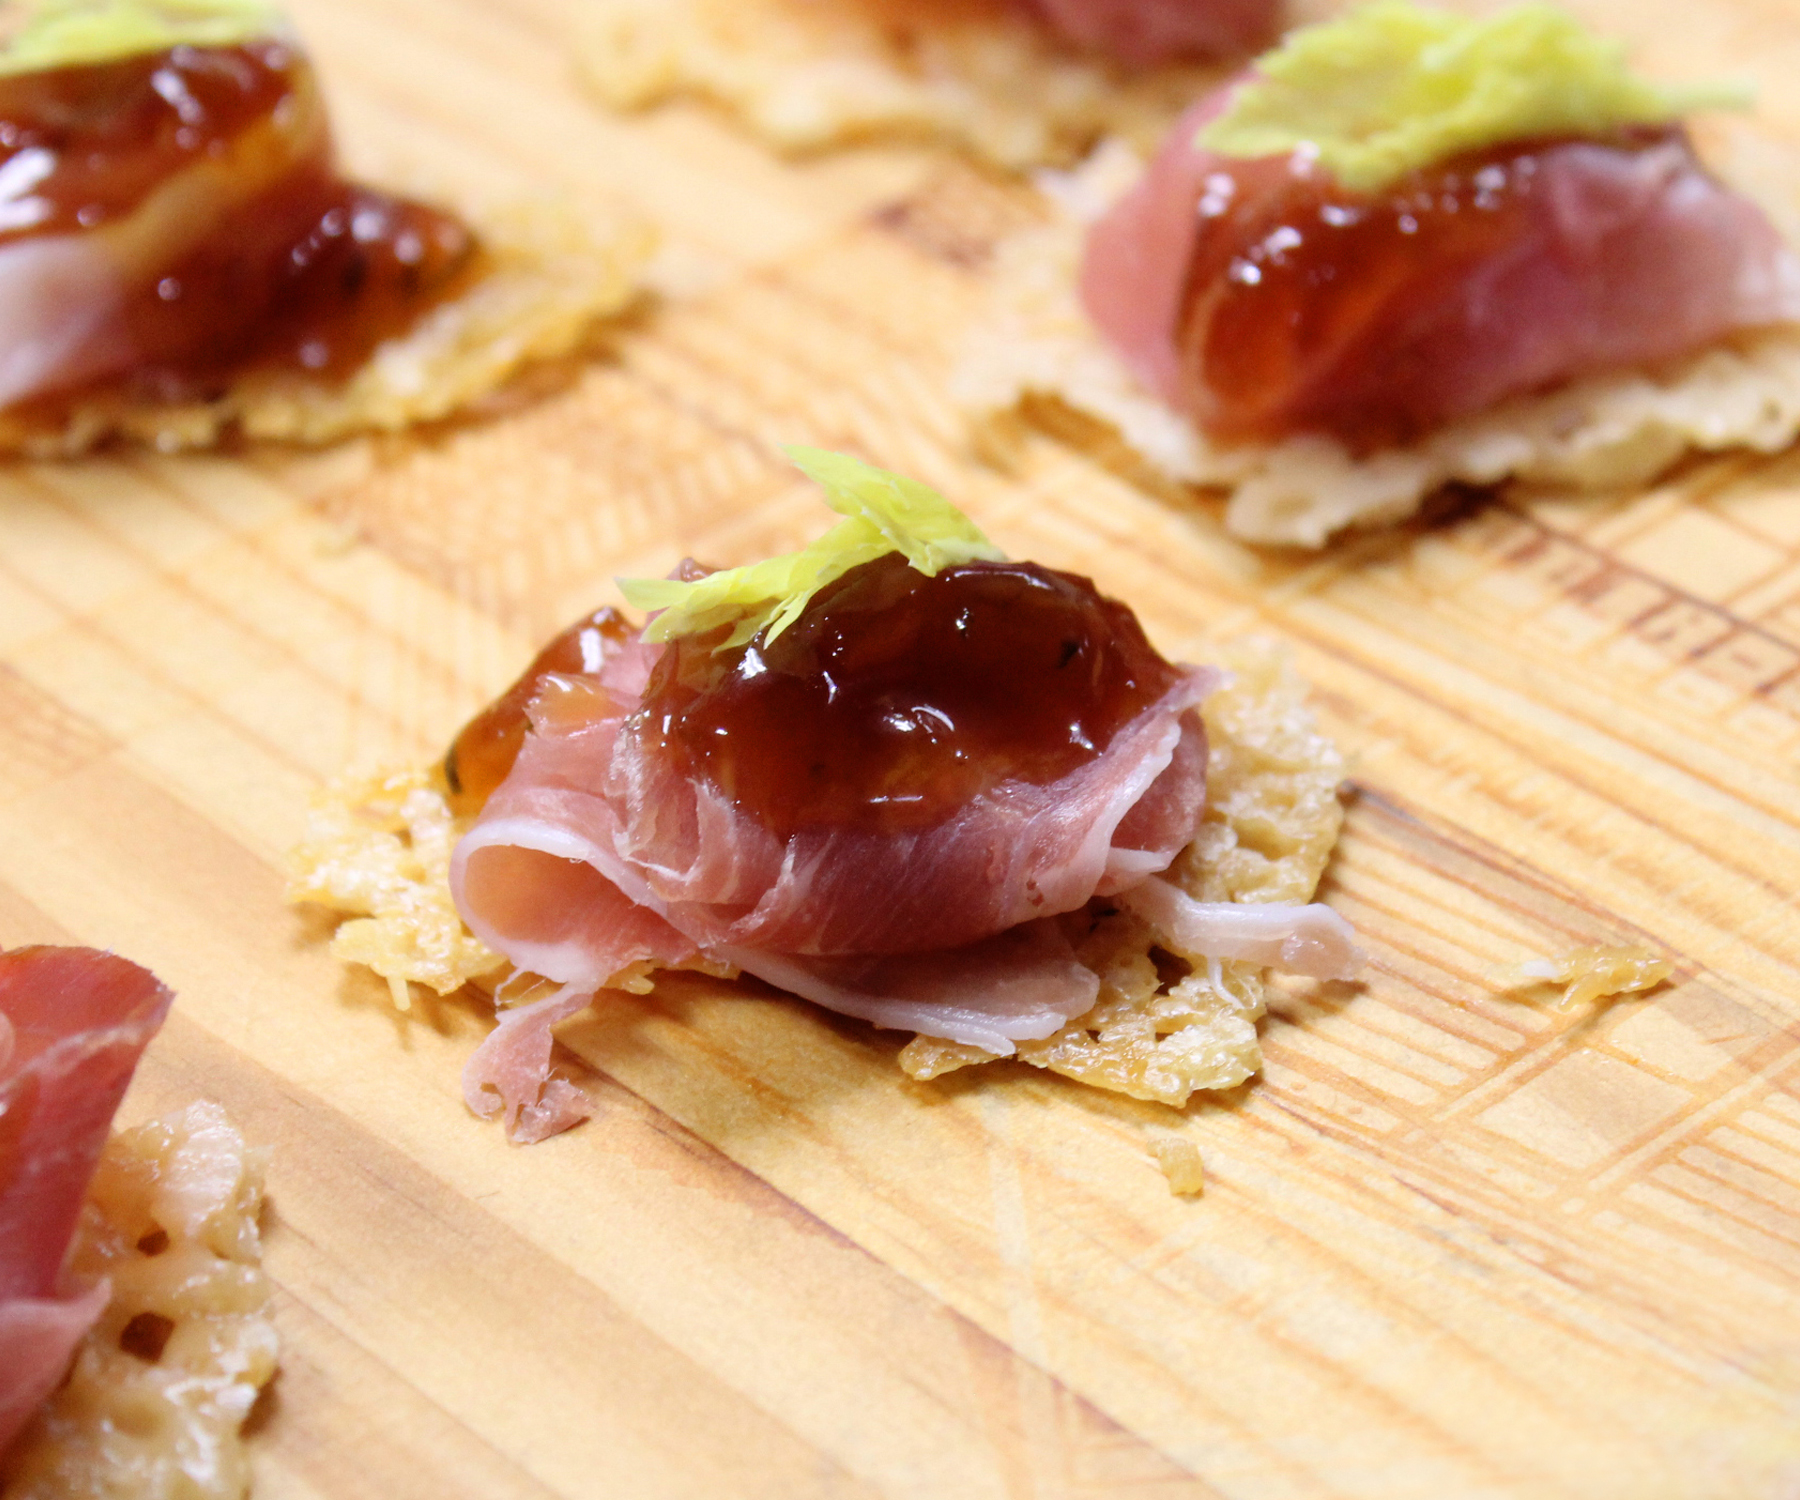 Parmesan crisps with Prosciutto and orange marmalade preserves topped with fresh celery leaves